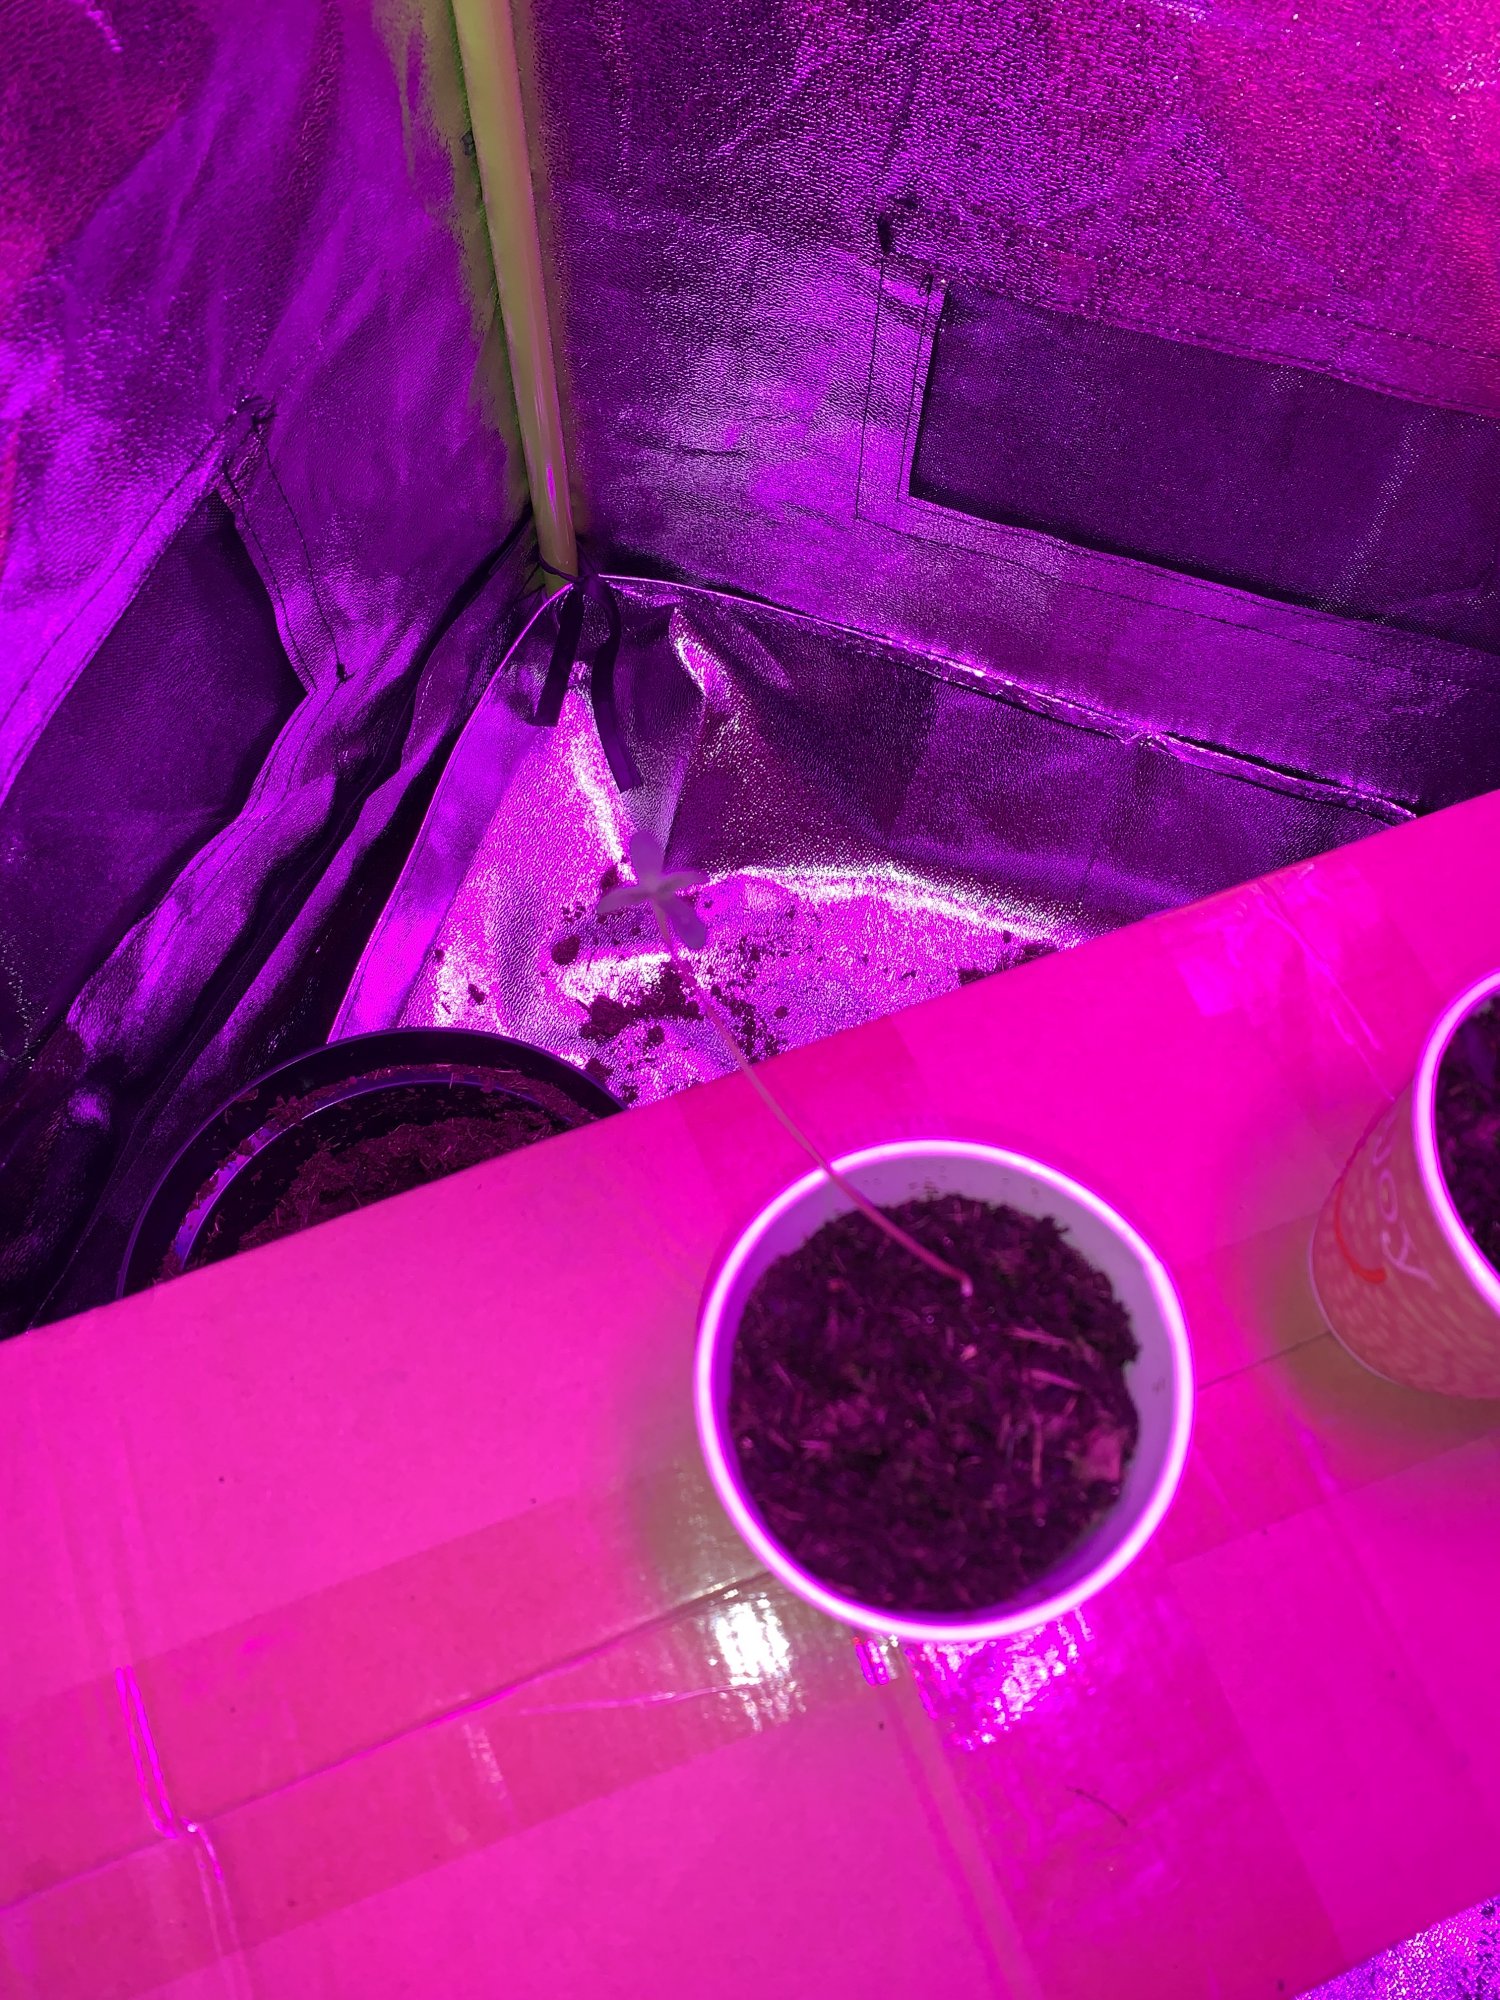 First timer growing 3 plants 5